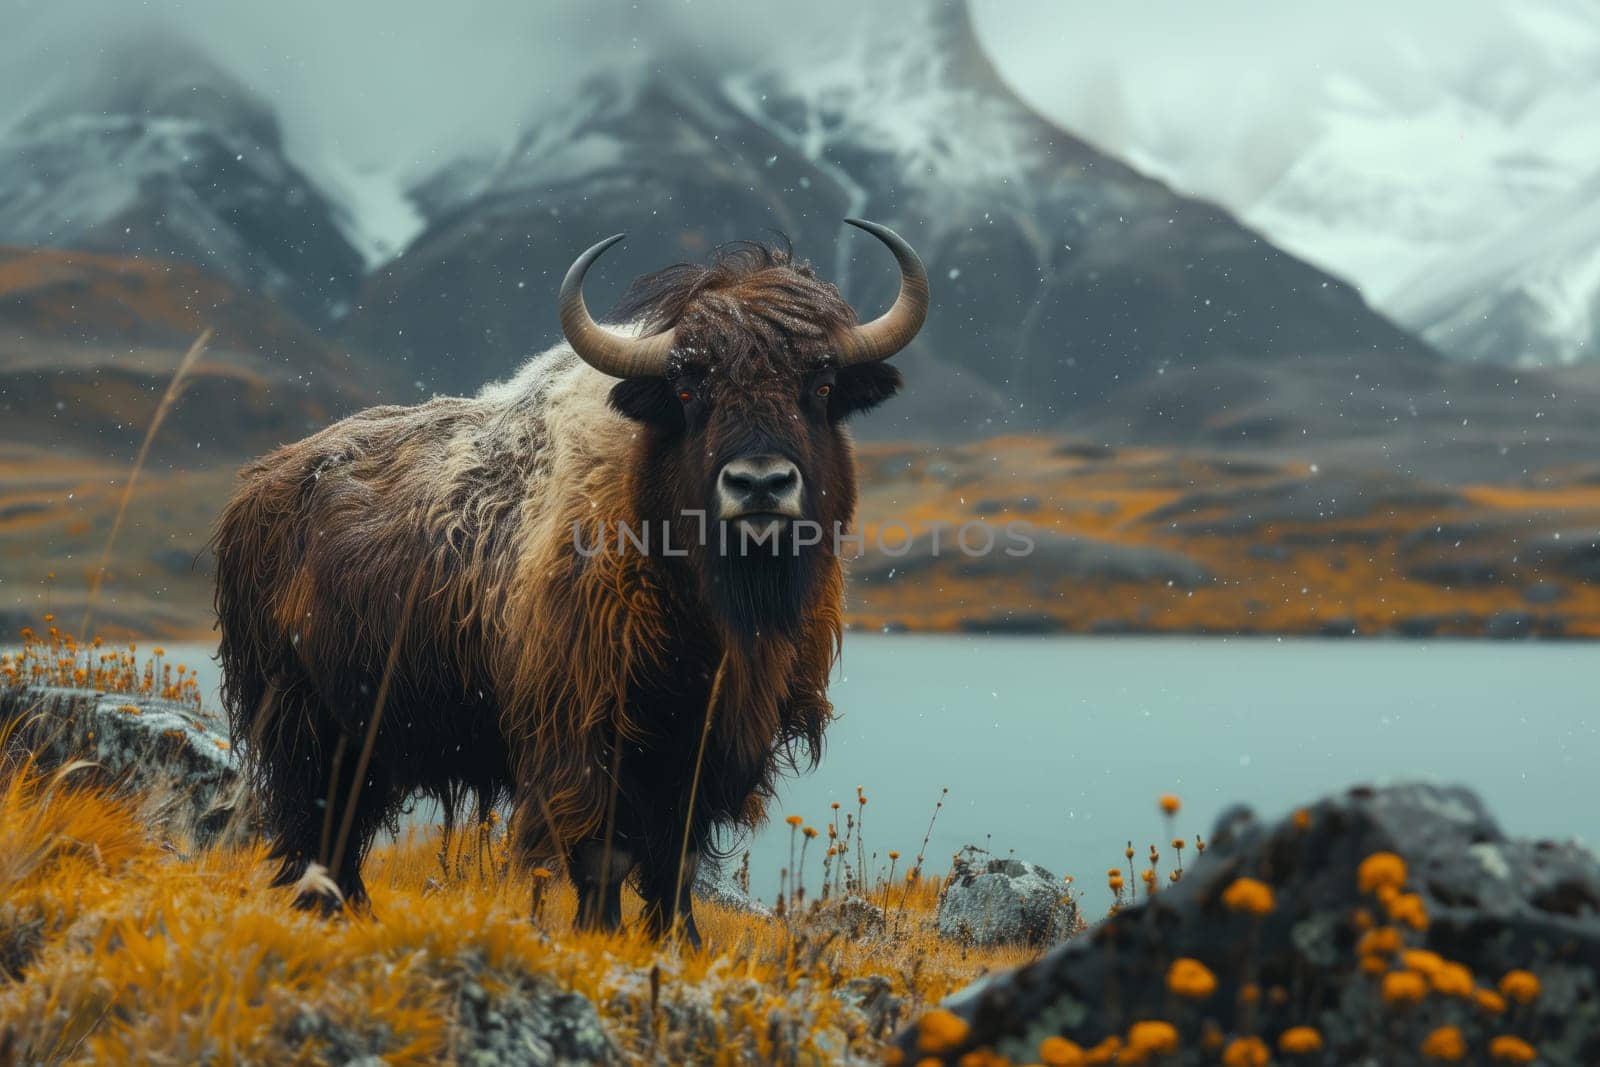 A yak stands on rocky highland overlooking a lake surrounded by mountains in a natural landscape with grasslands and plants in the ecoregion